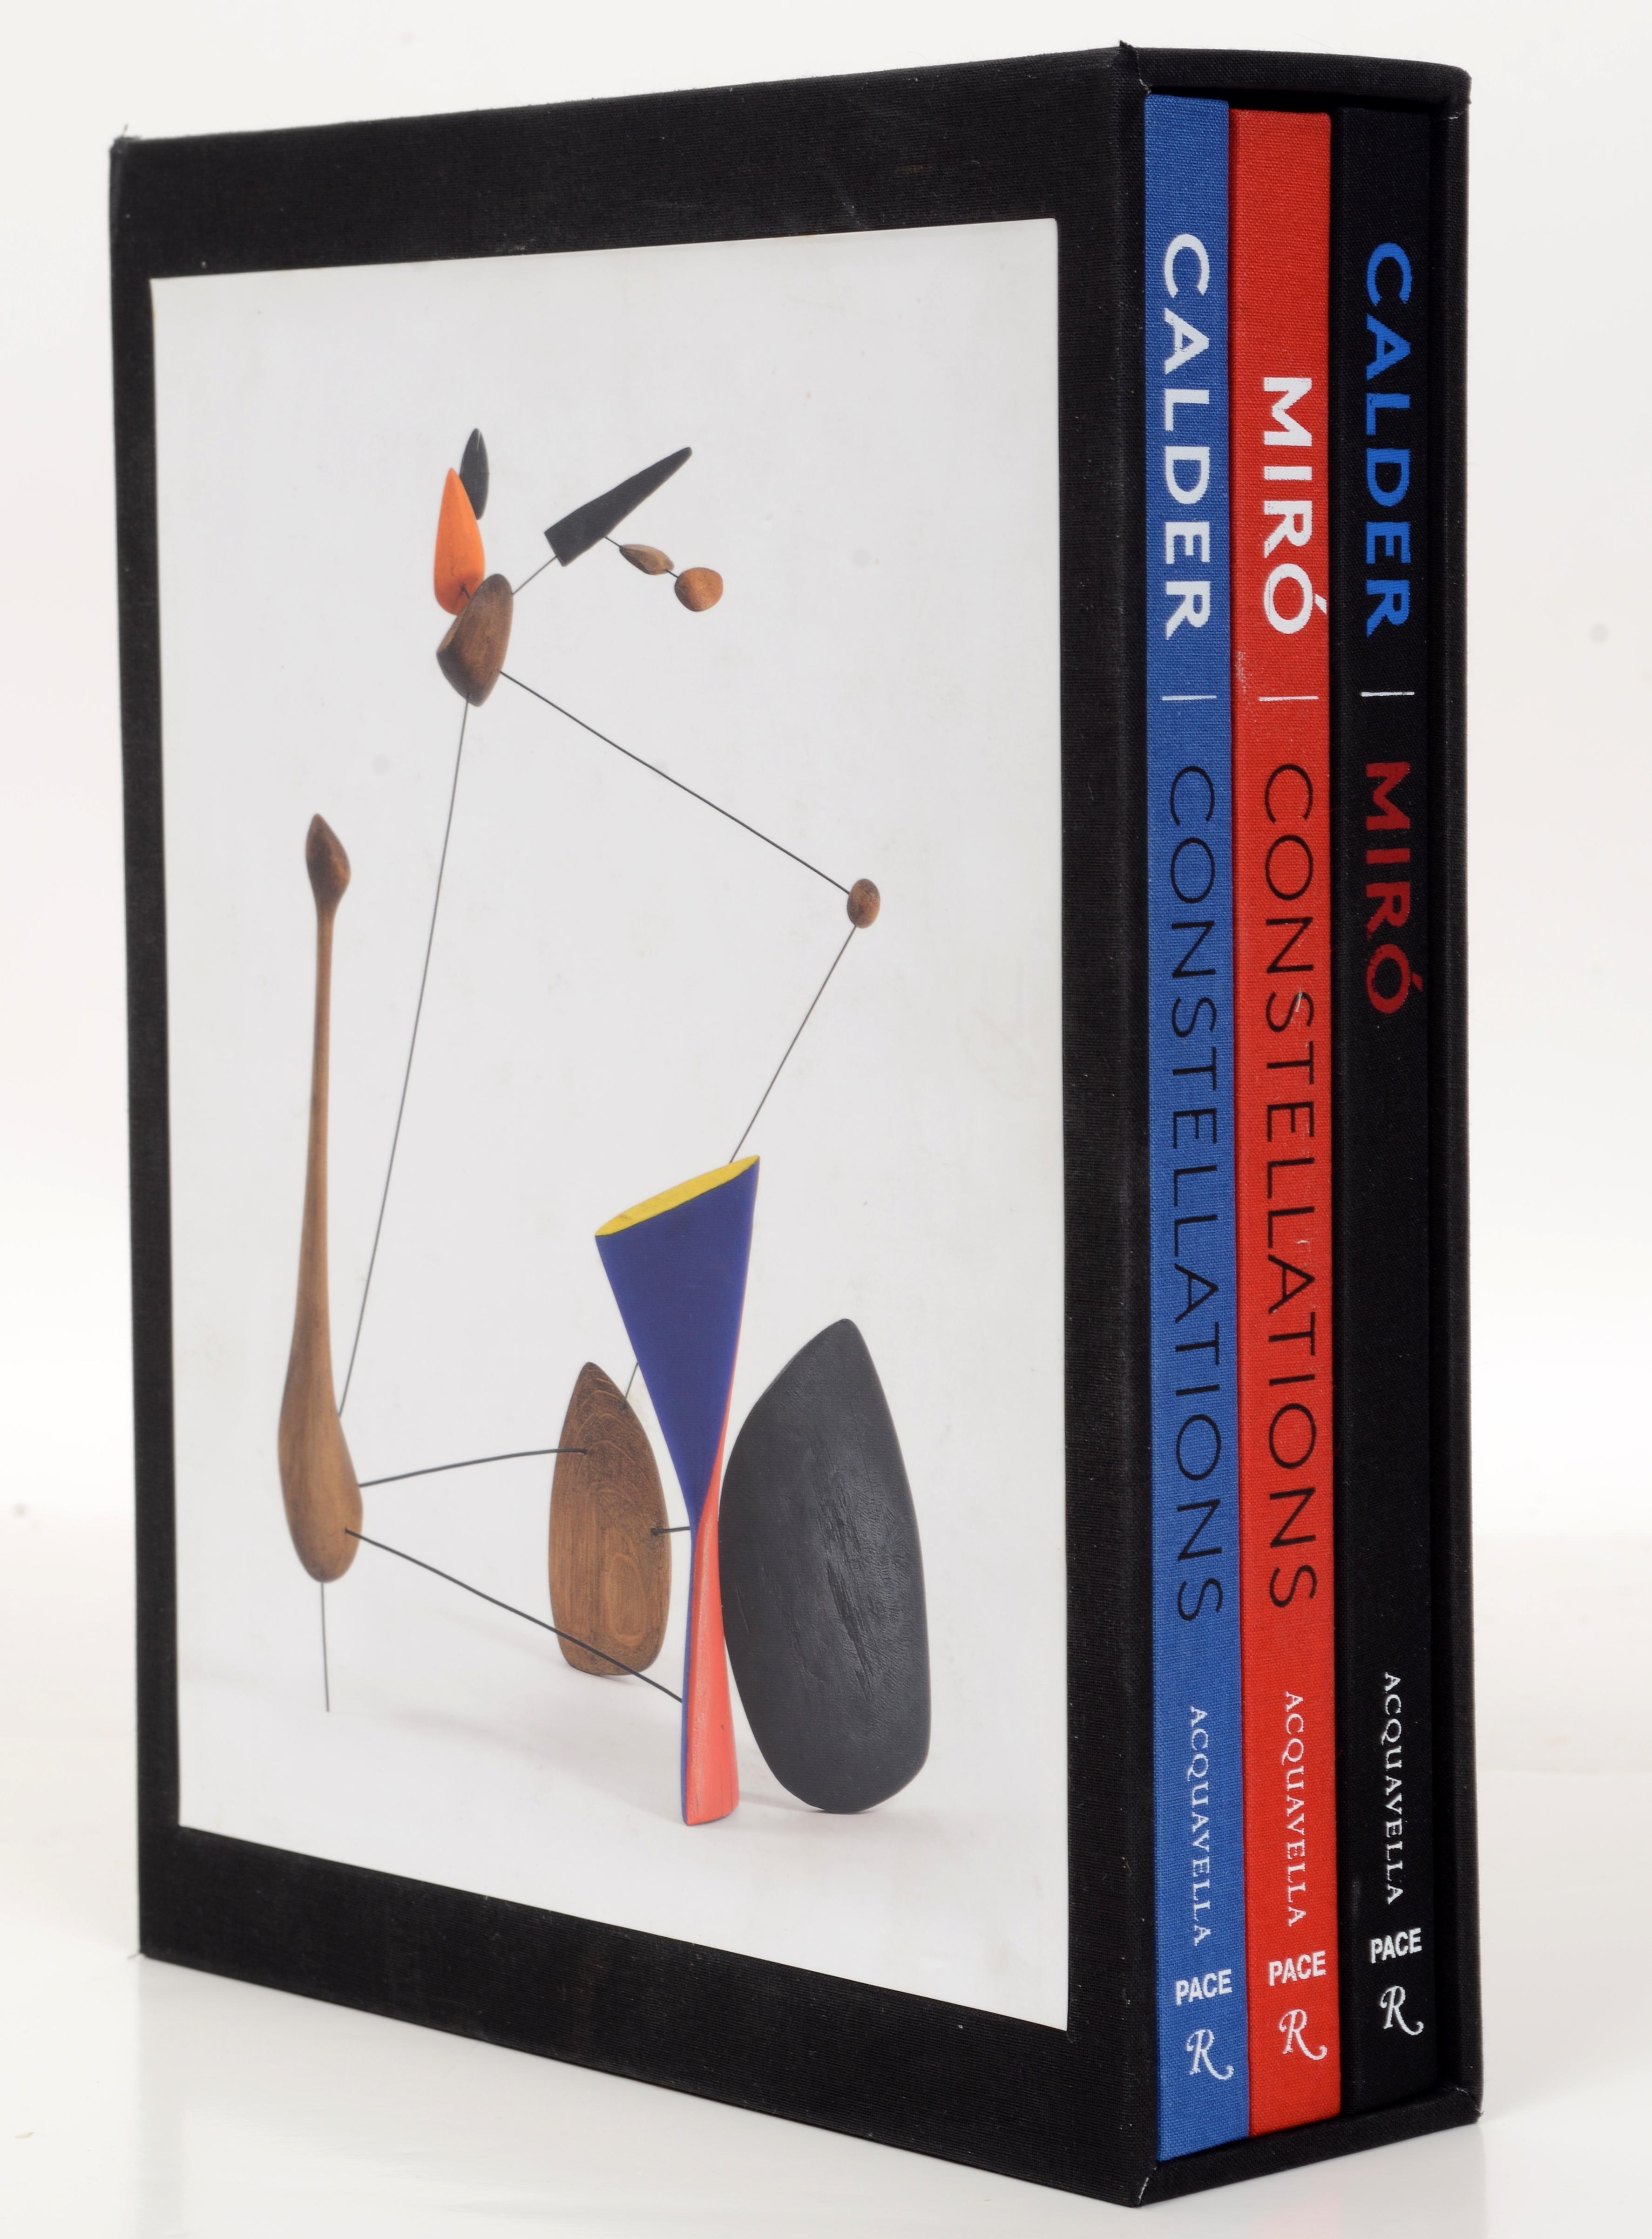 Miro & Calder's Constellations by Margit Rowell. Published by Rizzoli, 2017. Set of 3 1st Ed books in slip case. The sculptor Alexander Calder (1898-1976) and the painter Joan Miro (1893-1983) met in Paris in 1928 and became lifelong friends. This